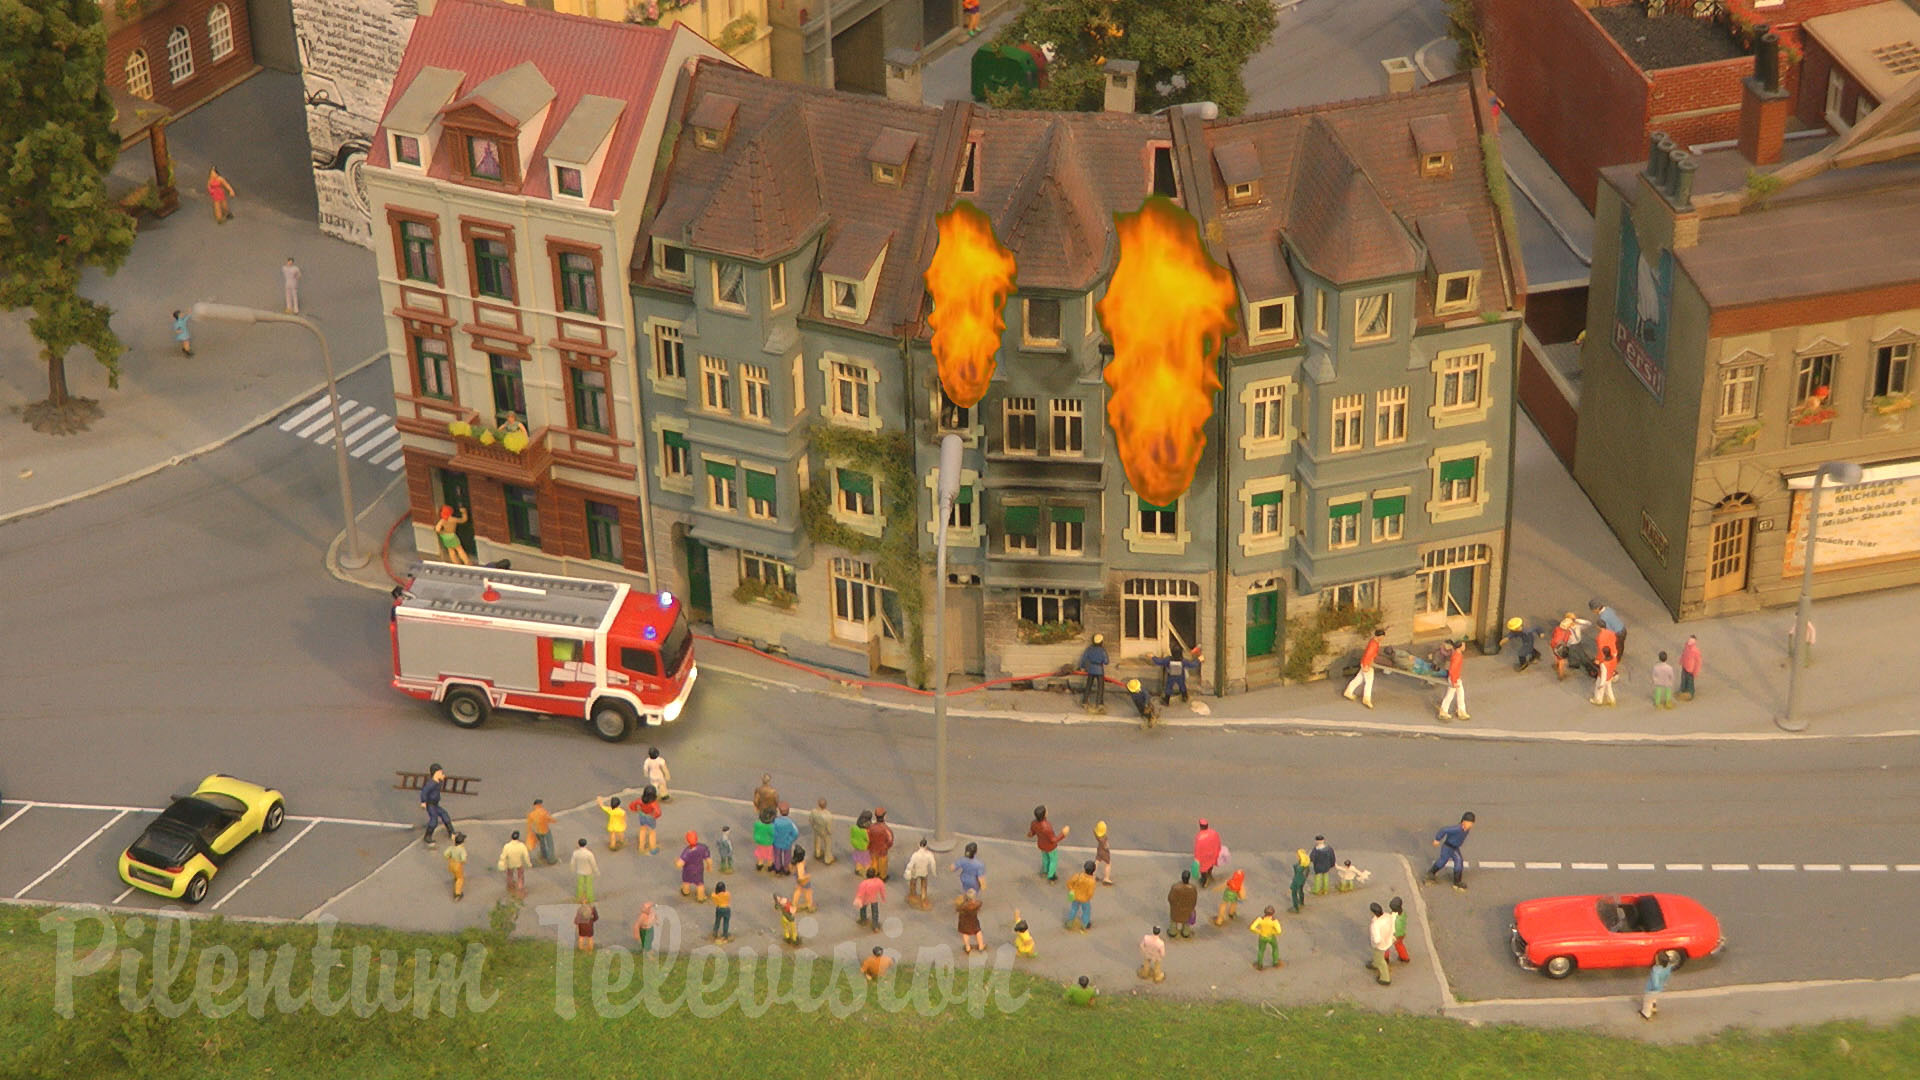 Not model trains, but model cars: Firefighters in action! Miniature camera inside the fire truck